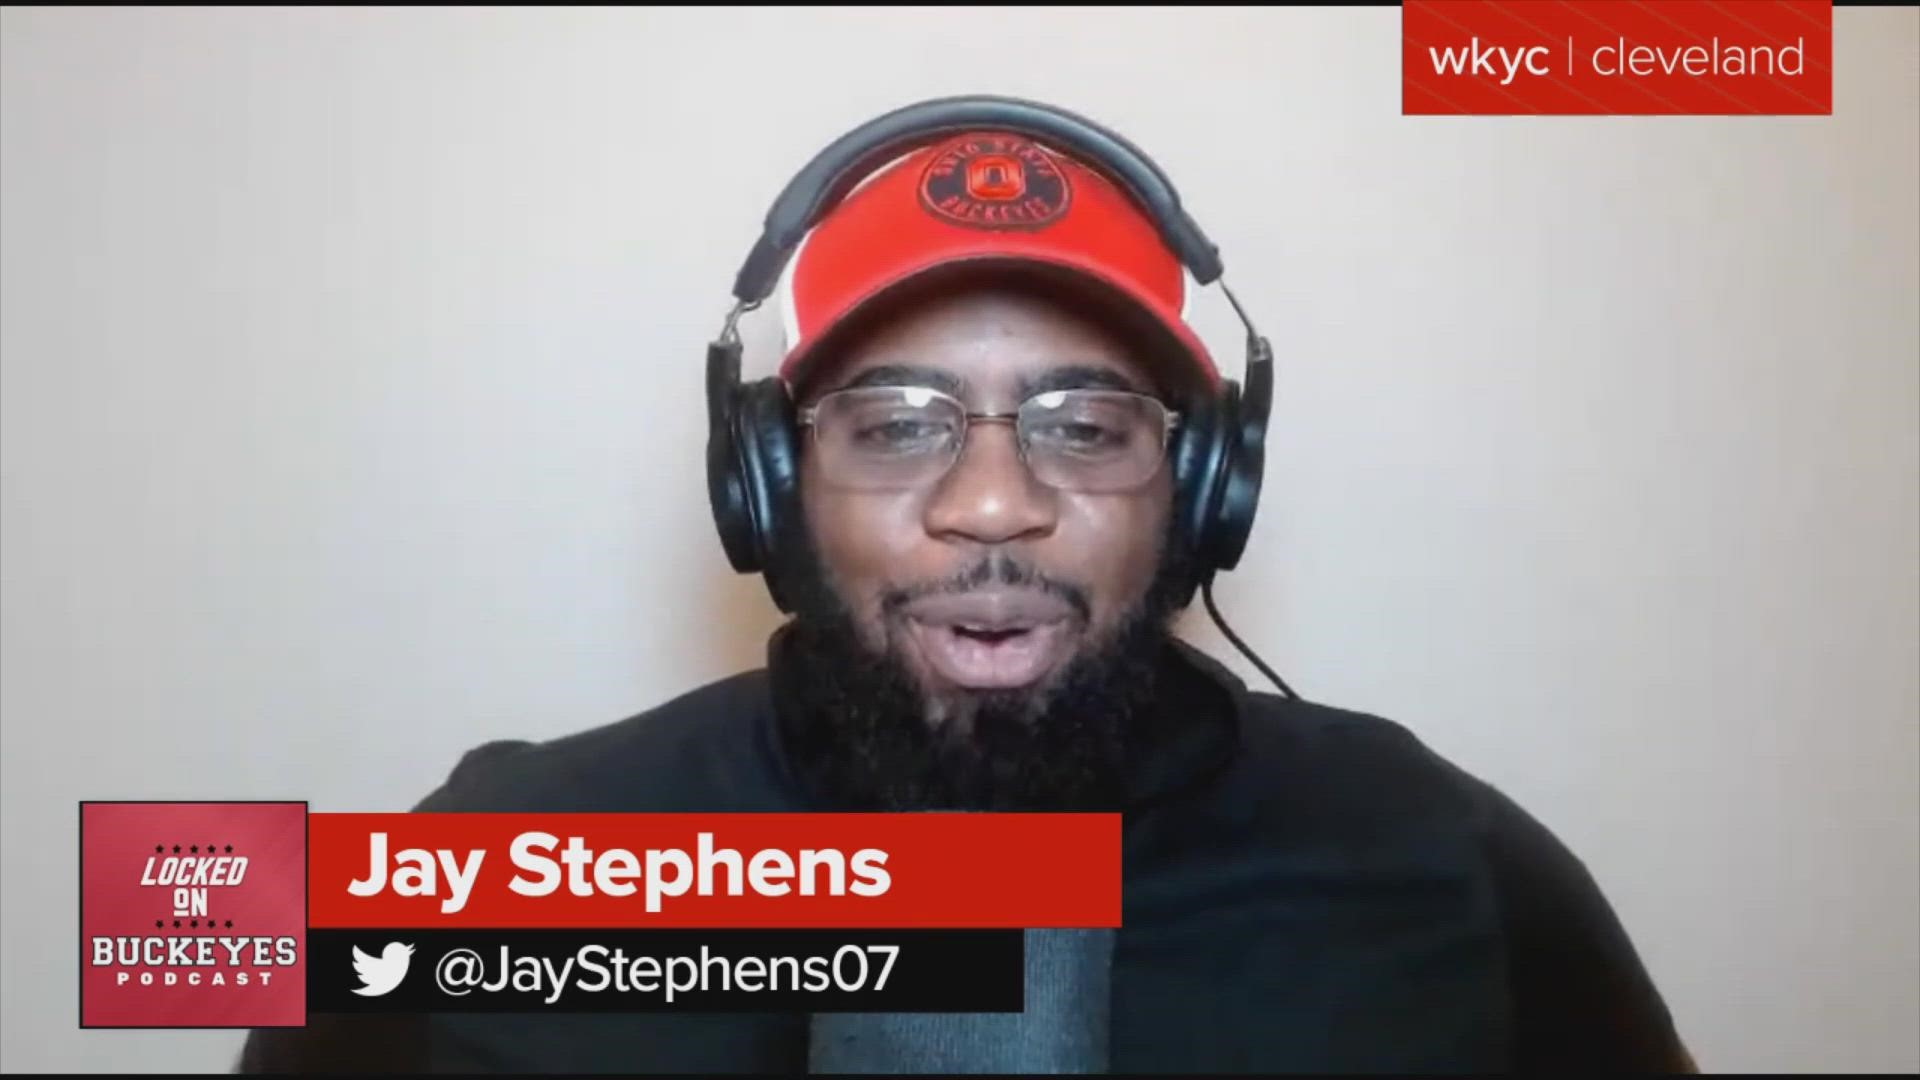 Jay Stephens discusses what happened against Iowa. Emily Giambalvo from the Washington Post joins the show to talk about Saturday's game against Maryland.